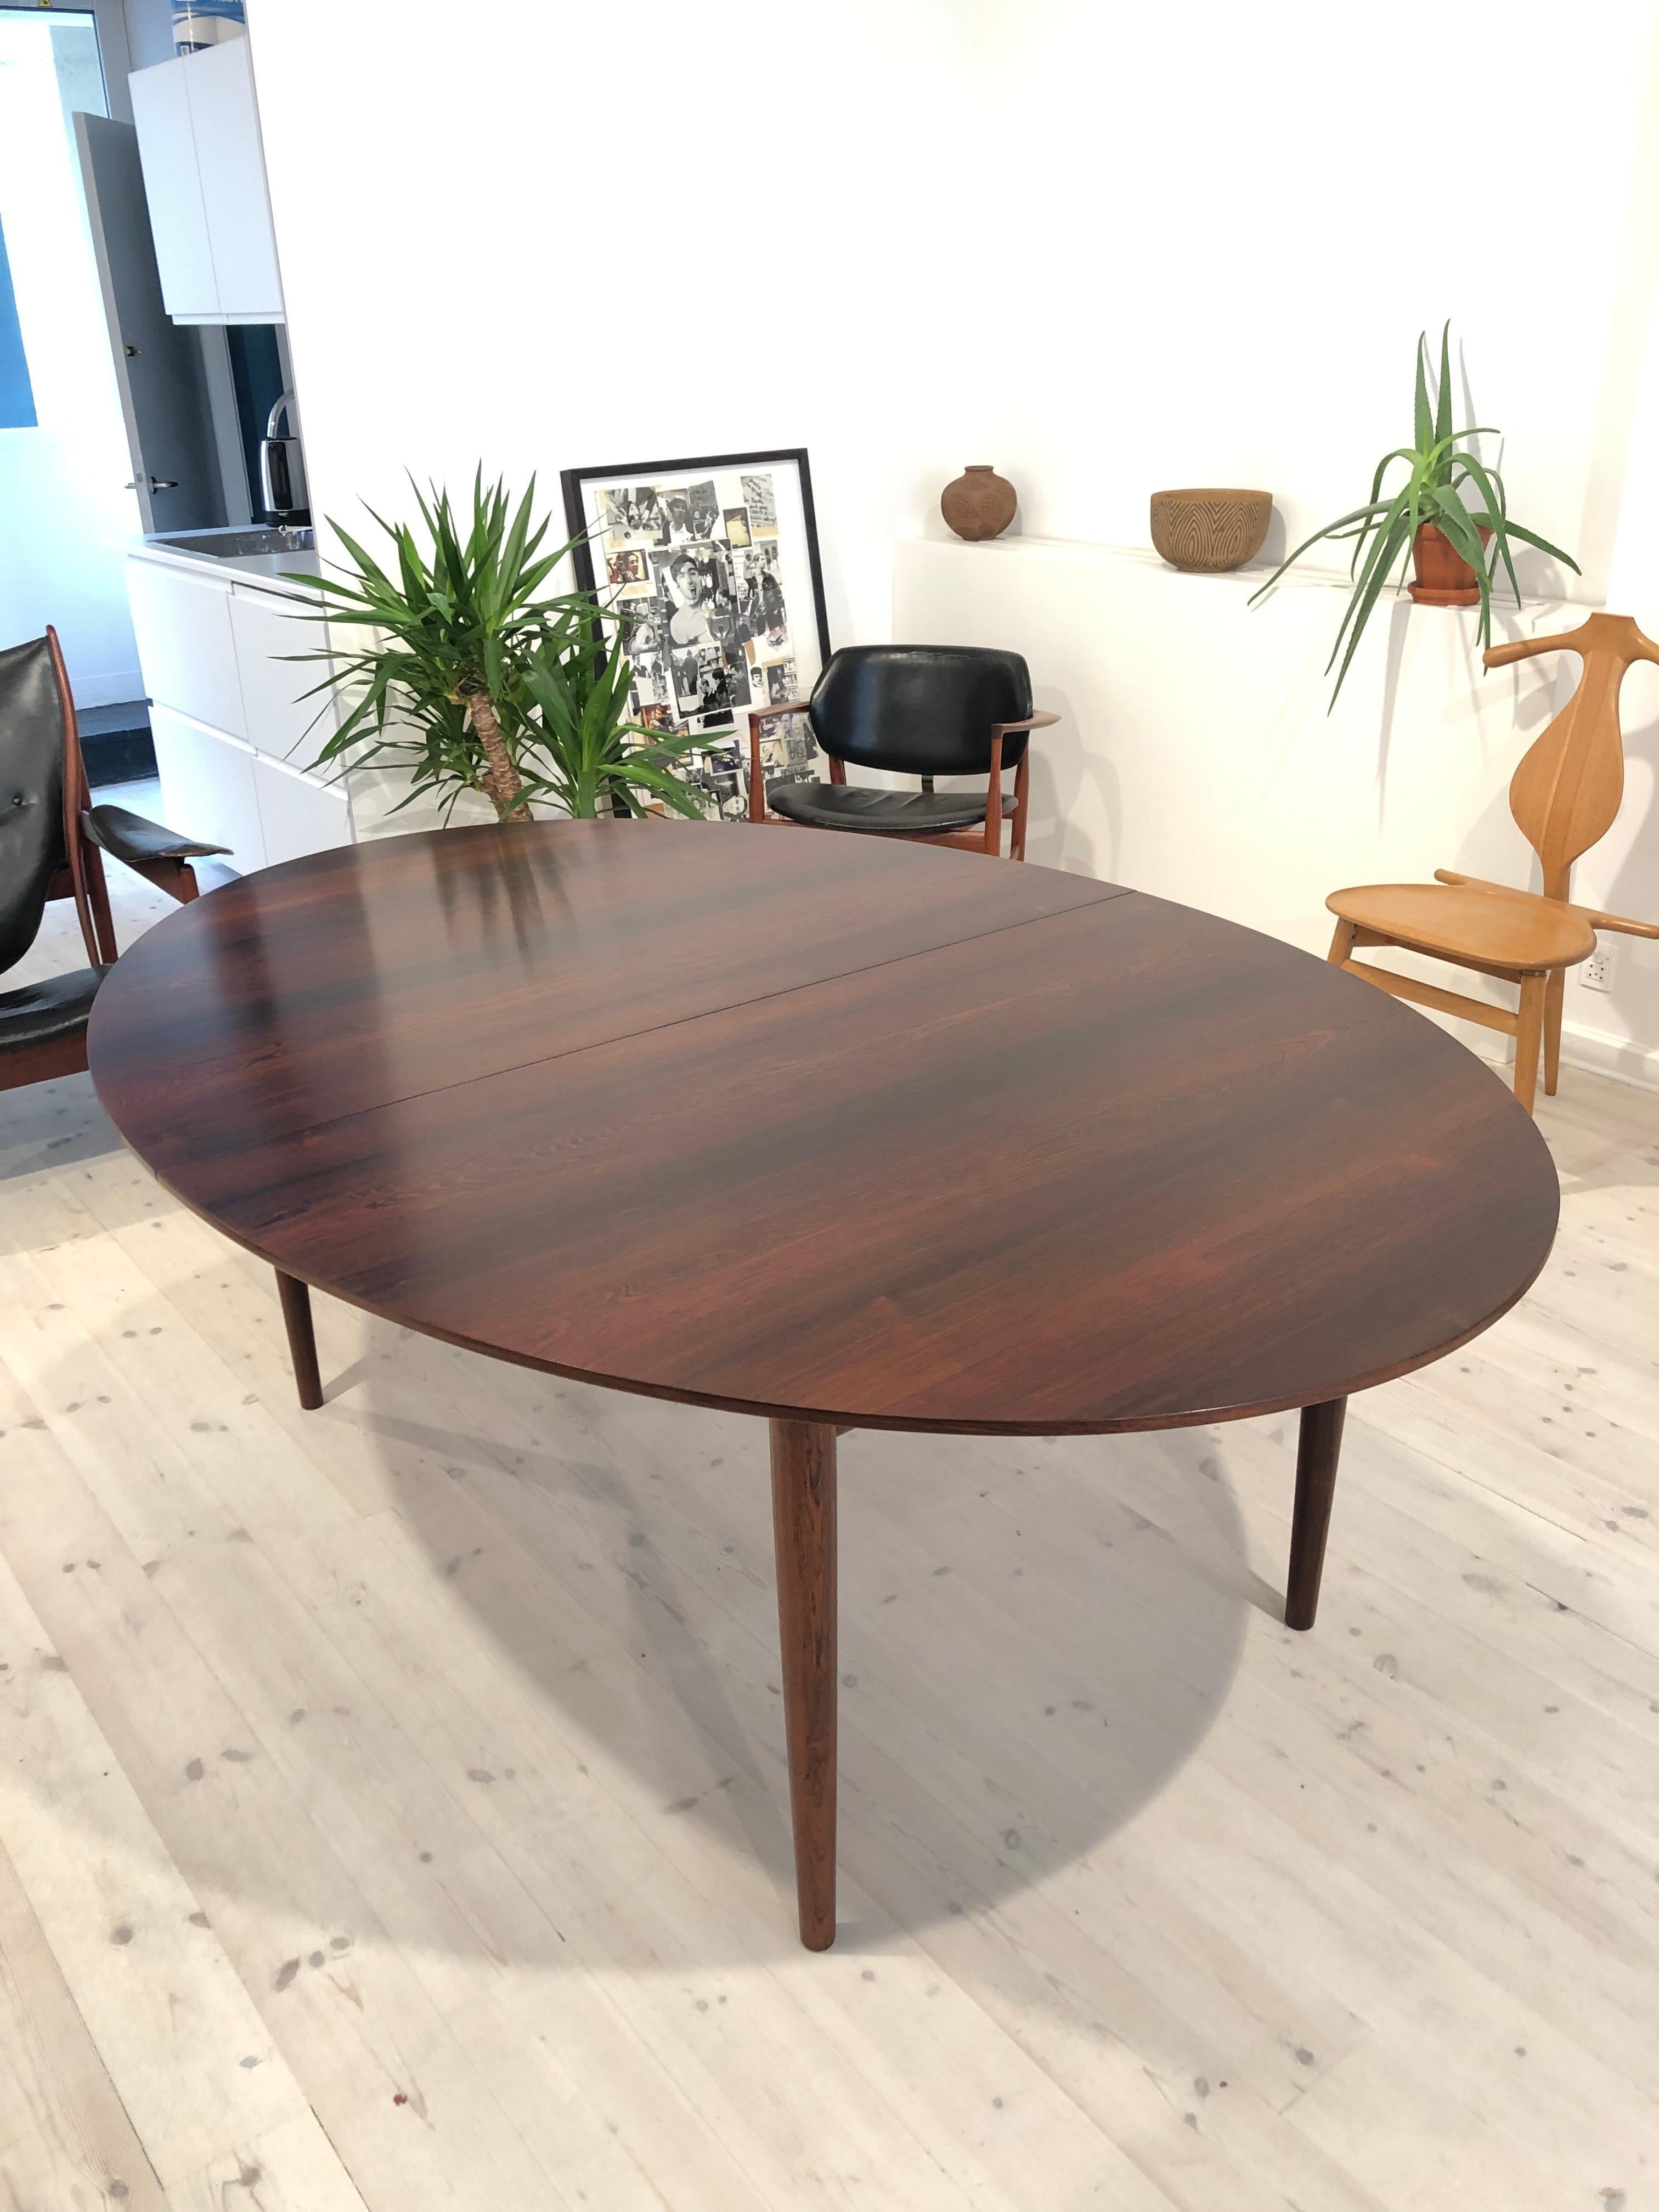 Mid-20th Century Finn Juhl Large 'Judas' Dining Table in Brazilian Rosewood for Niels Vodder 1949